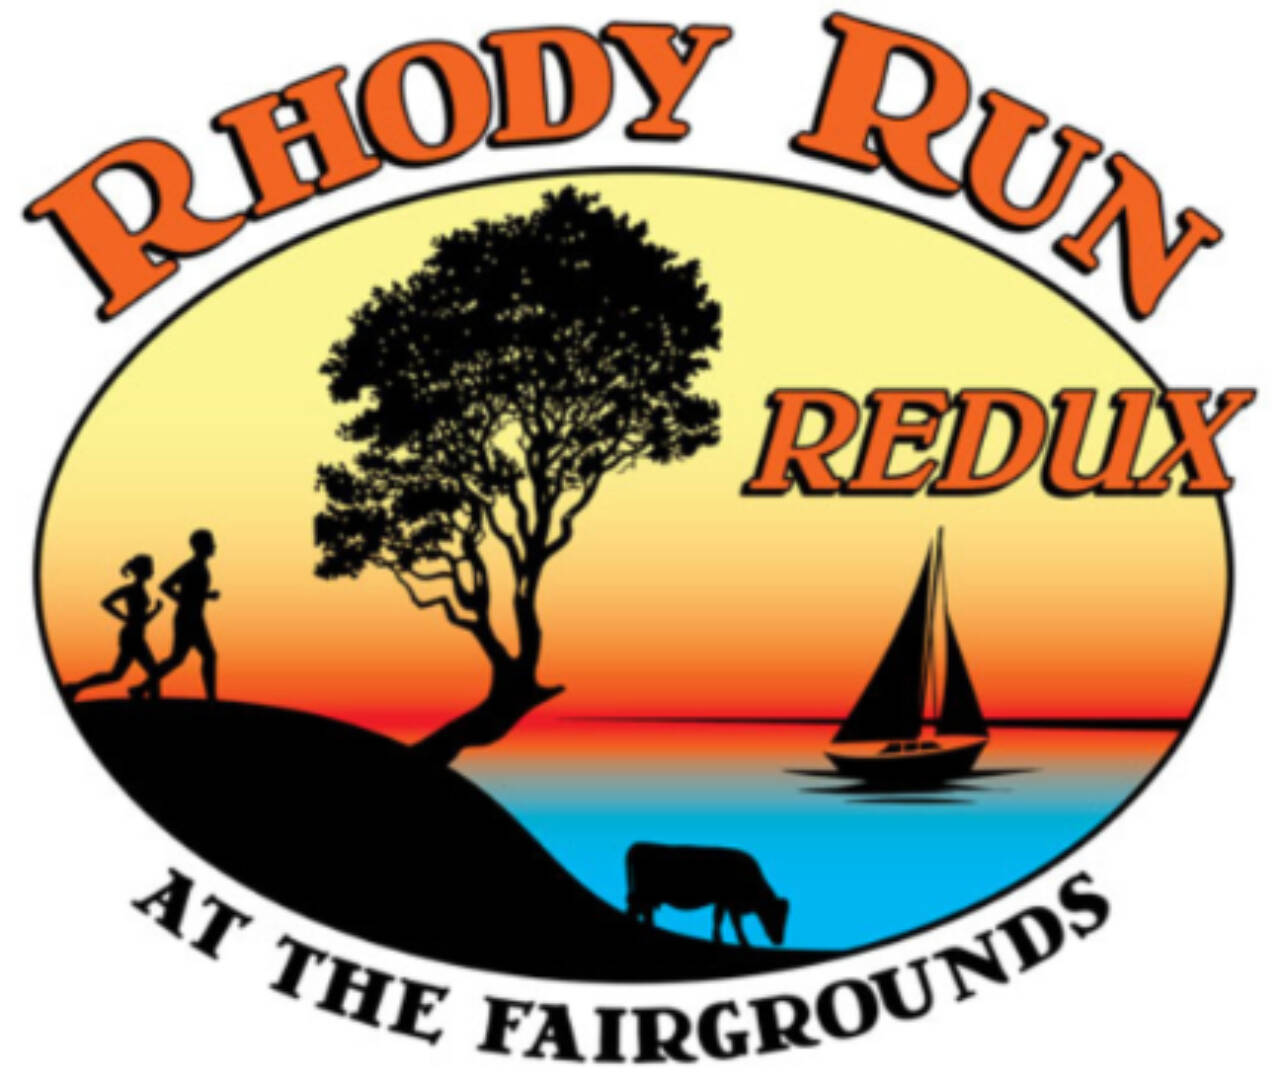 The Rhody Run returns Sunday with 5K and 10K races beginning at the Jefferson County Fairgrounds.